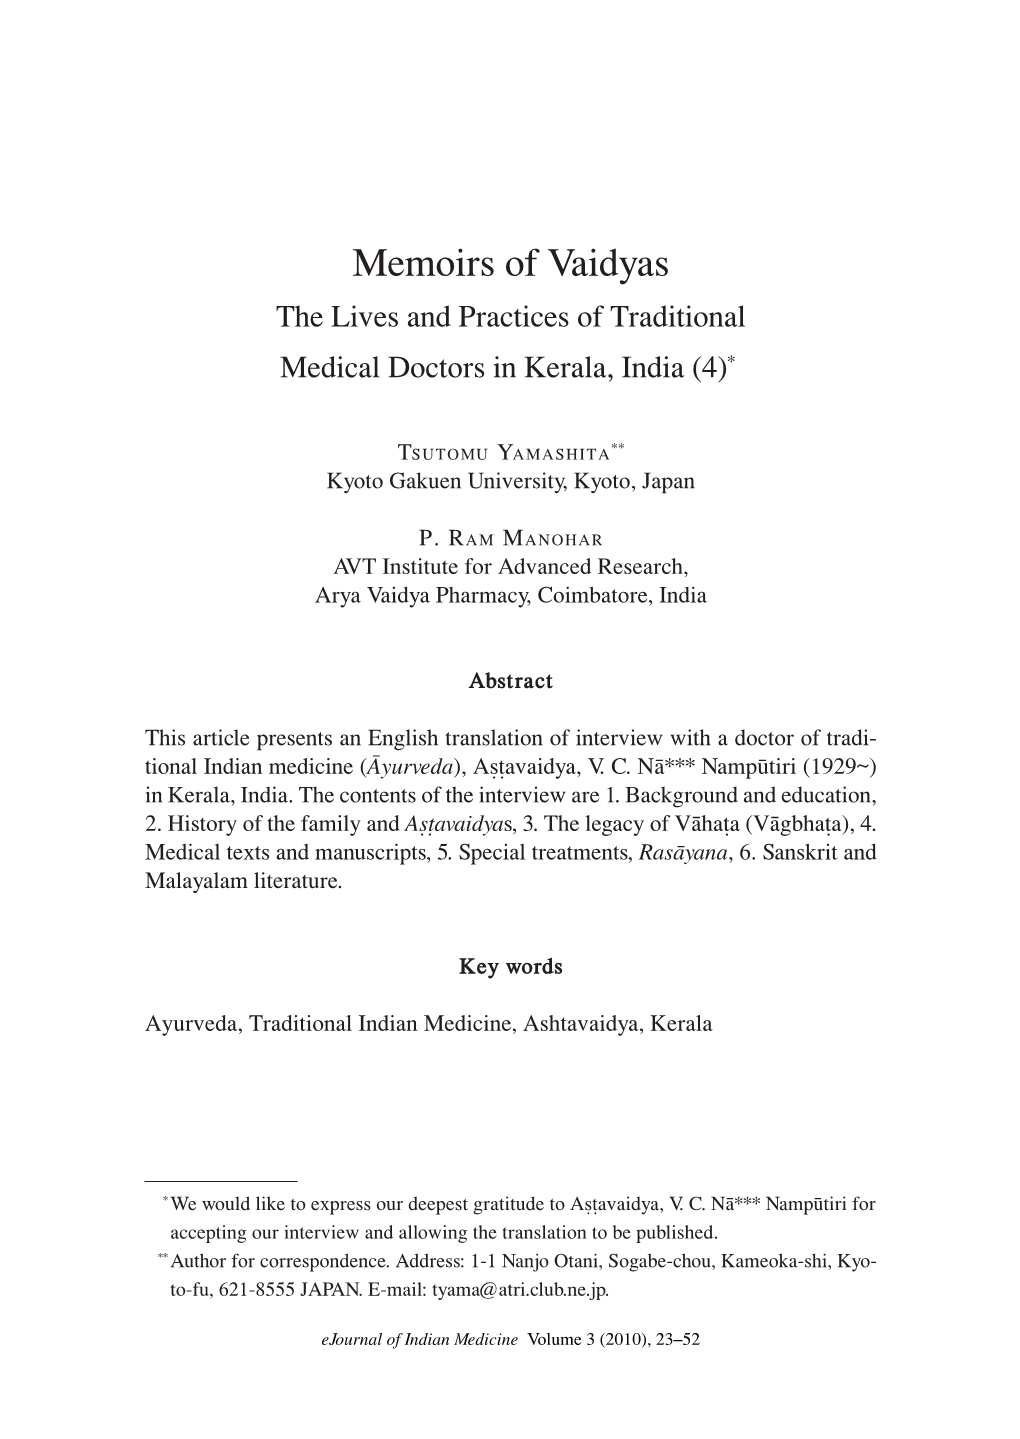 Memoirs of Vaidyas. the Lives and Practices of Traditional Medical Doctors in Kerala, India